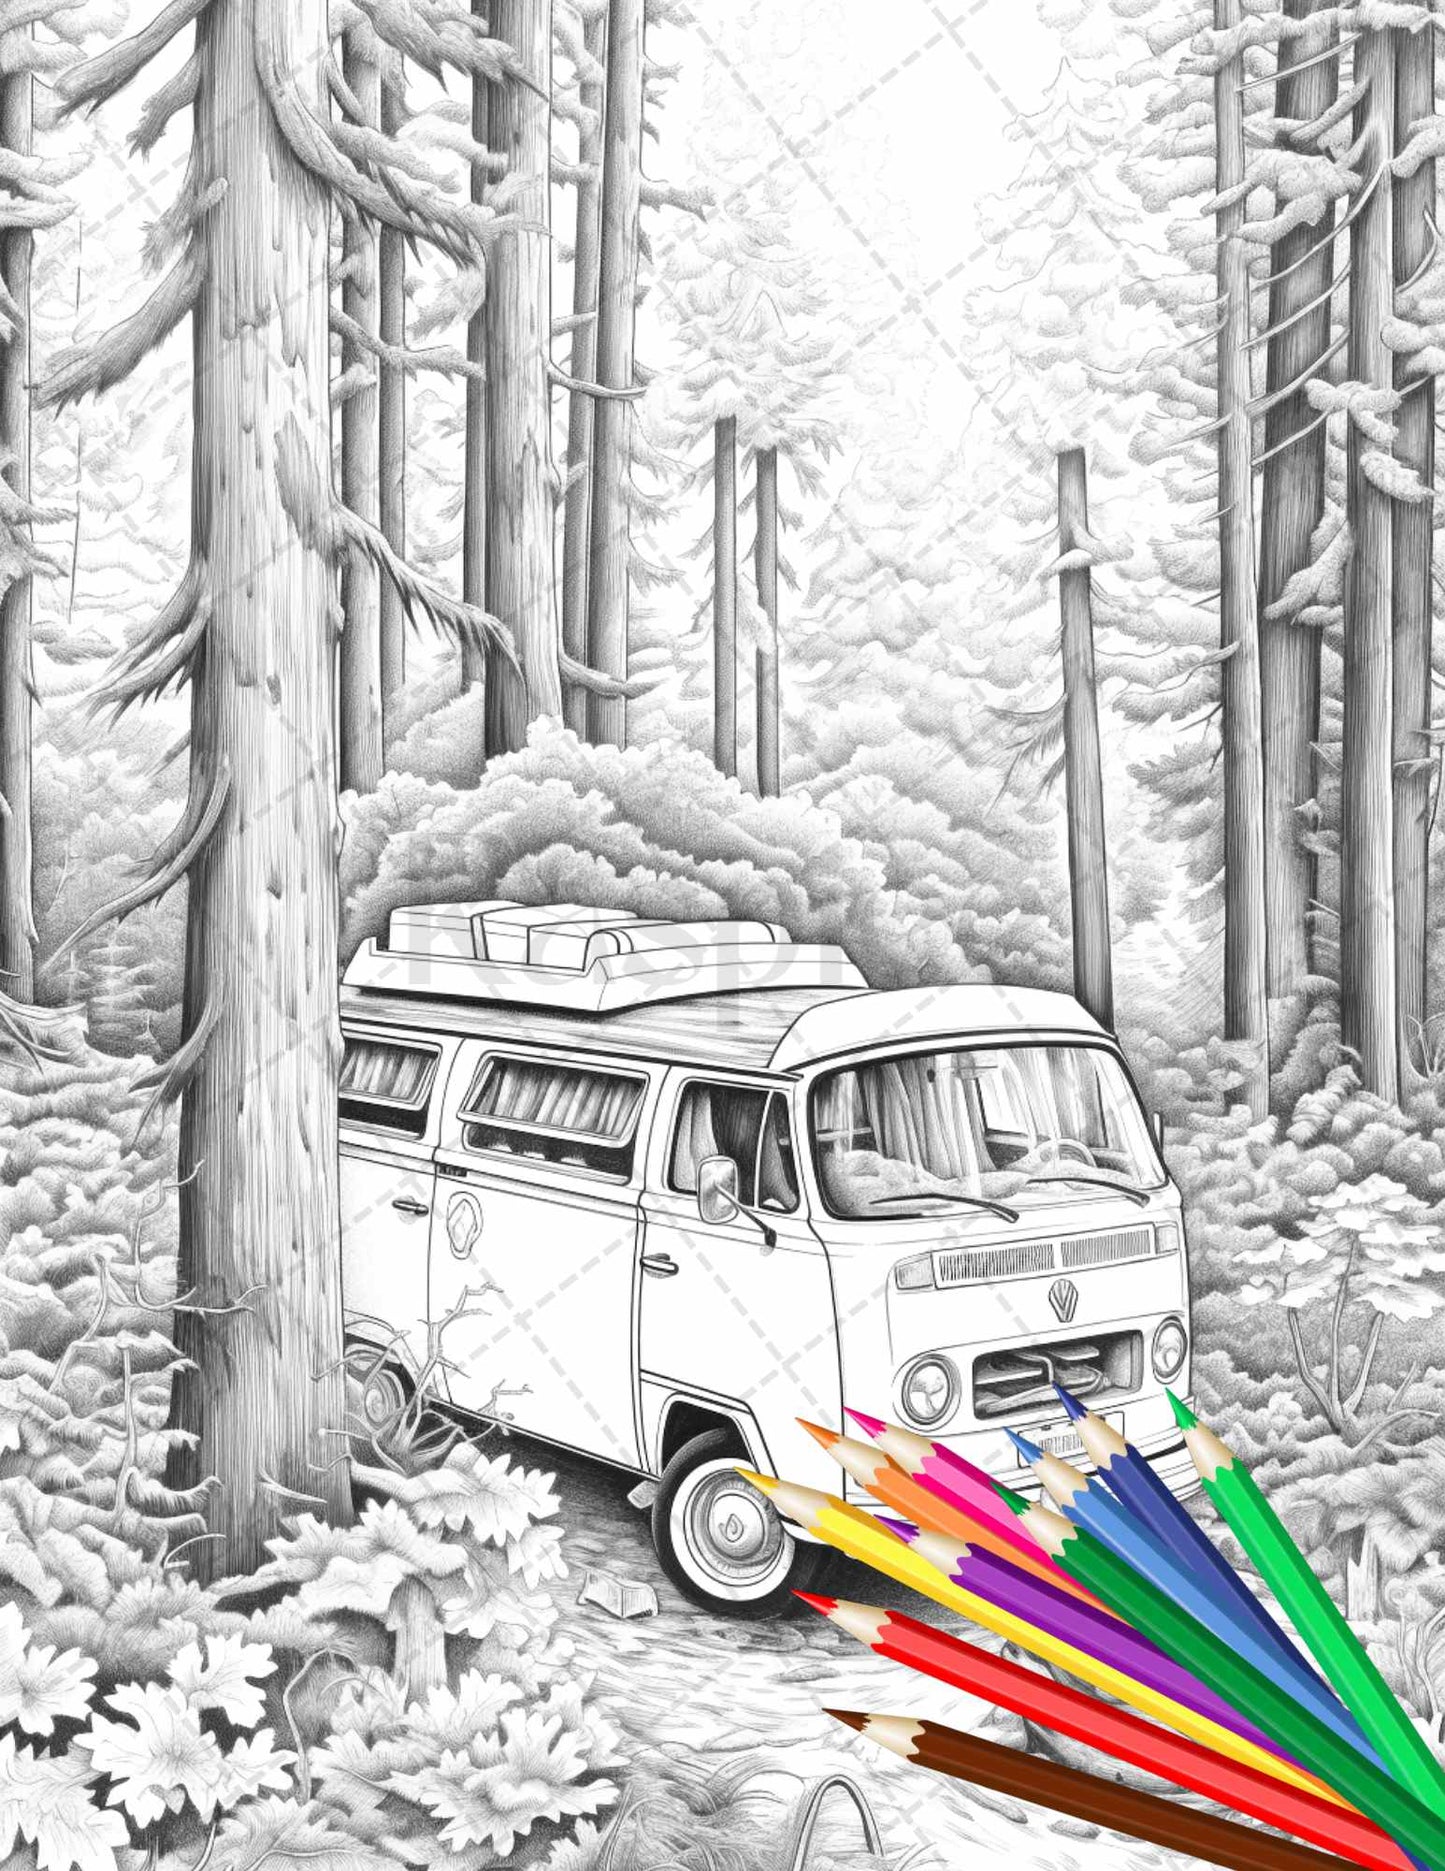 Campervan Adventure Coloring Pages, Grayscale Coloring Sheets, Printable Campervan Coloring Book, Adult Coloring Pages Download, Black and White Campervan Art, Outdoor Adventure Coloring Sheets, Nature-themed Grayscale Coloring Pages, Relaxing Campervan Coloring Book, Instant Download Coloring Pages, Stress Relief Coloring Sheets, Campervan Decor Prints, Travel-themed Coloring Pages, Creative Coloring Activity for Adults, Campervan Illustrations for Coloring, Detailed Campervan Coloring Images